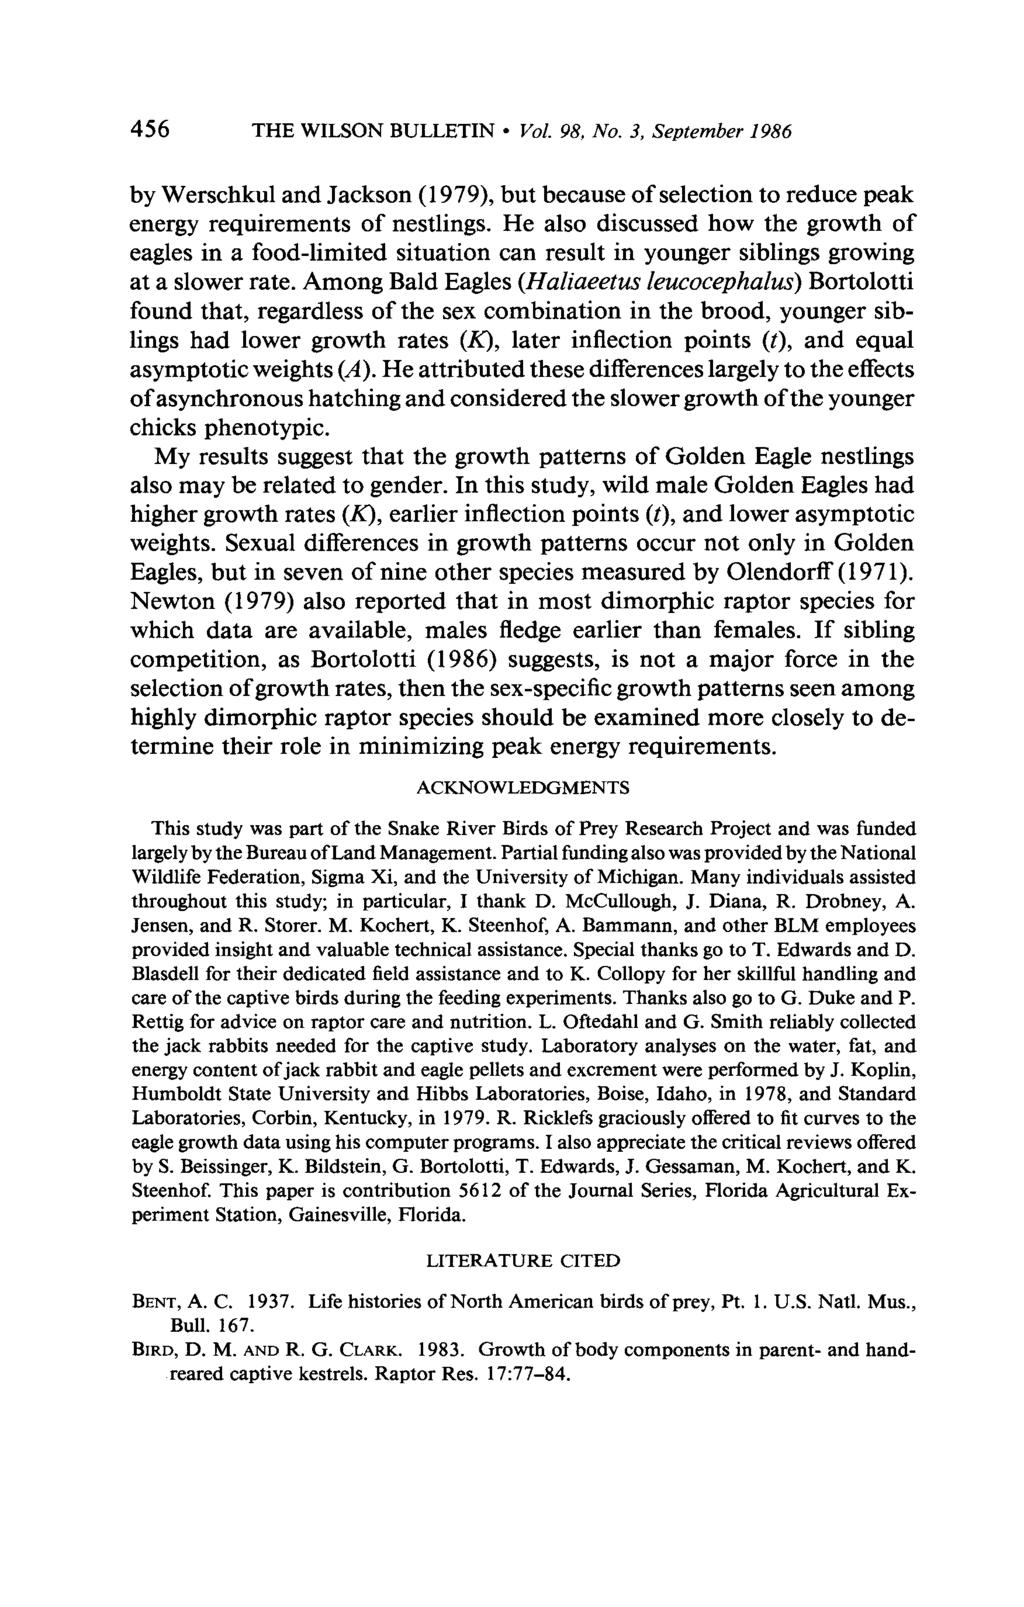 456 THE WILSON BULLETIN l Vol. 98, No. 3, September 1986 by Werschkul and Jackson (1979), but because of selection to reduce peak energy requirements of nestlings.